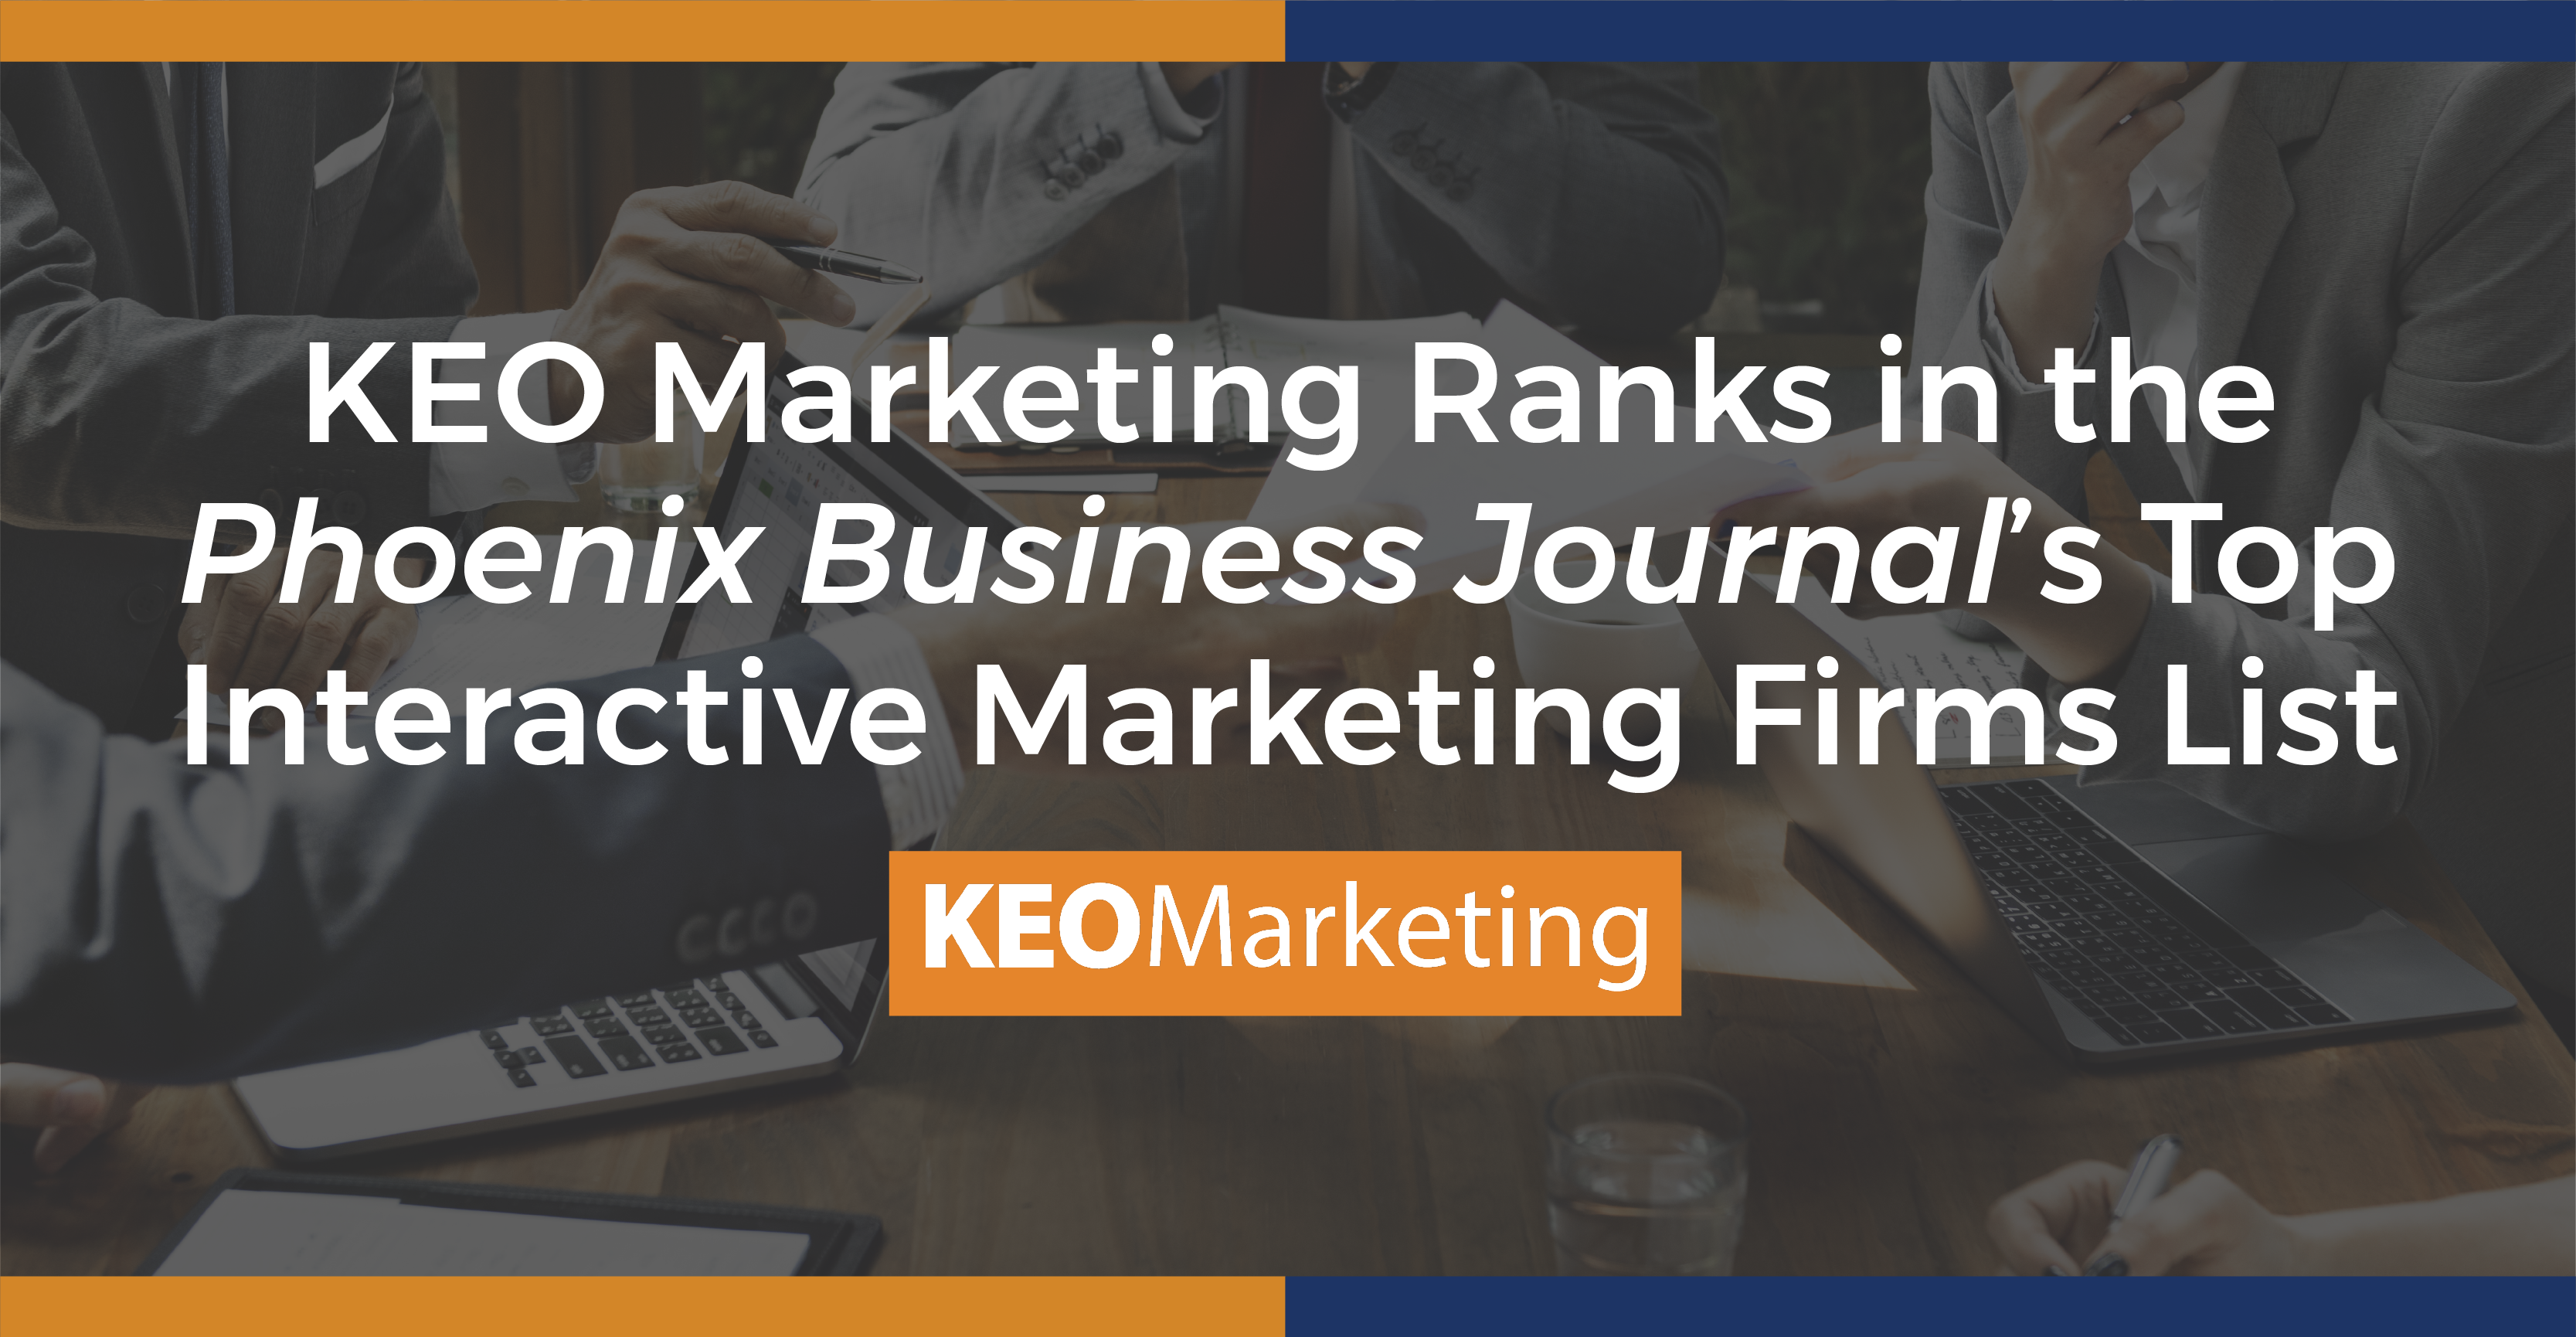 KEO Marketing Ranks in the Phoenix Business Journal’s Top Interactive Marketing Firms List